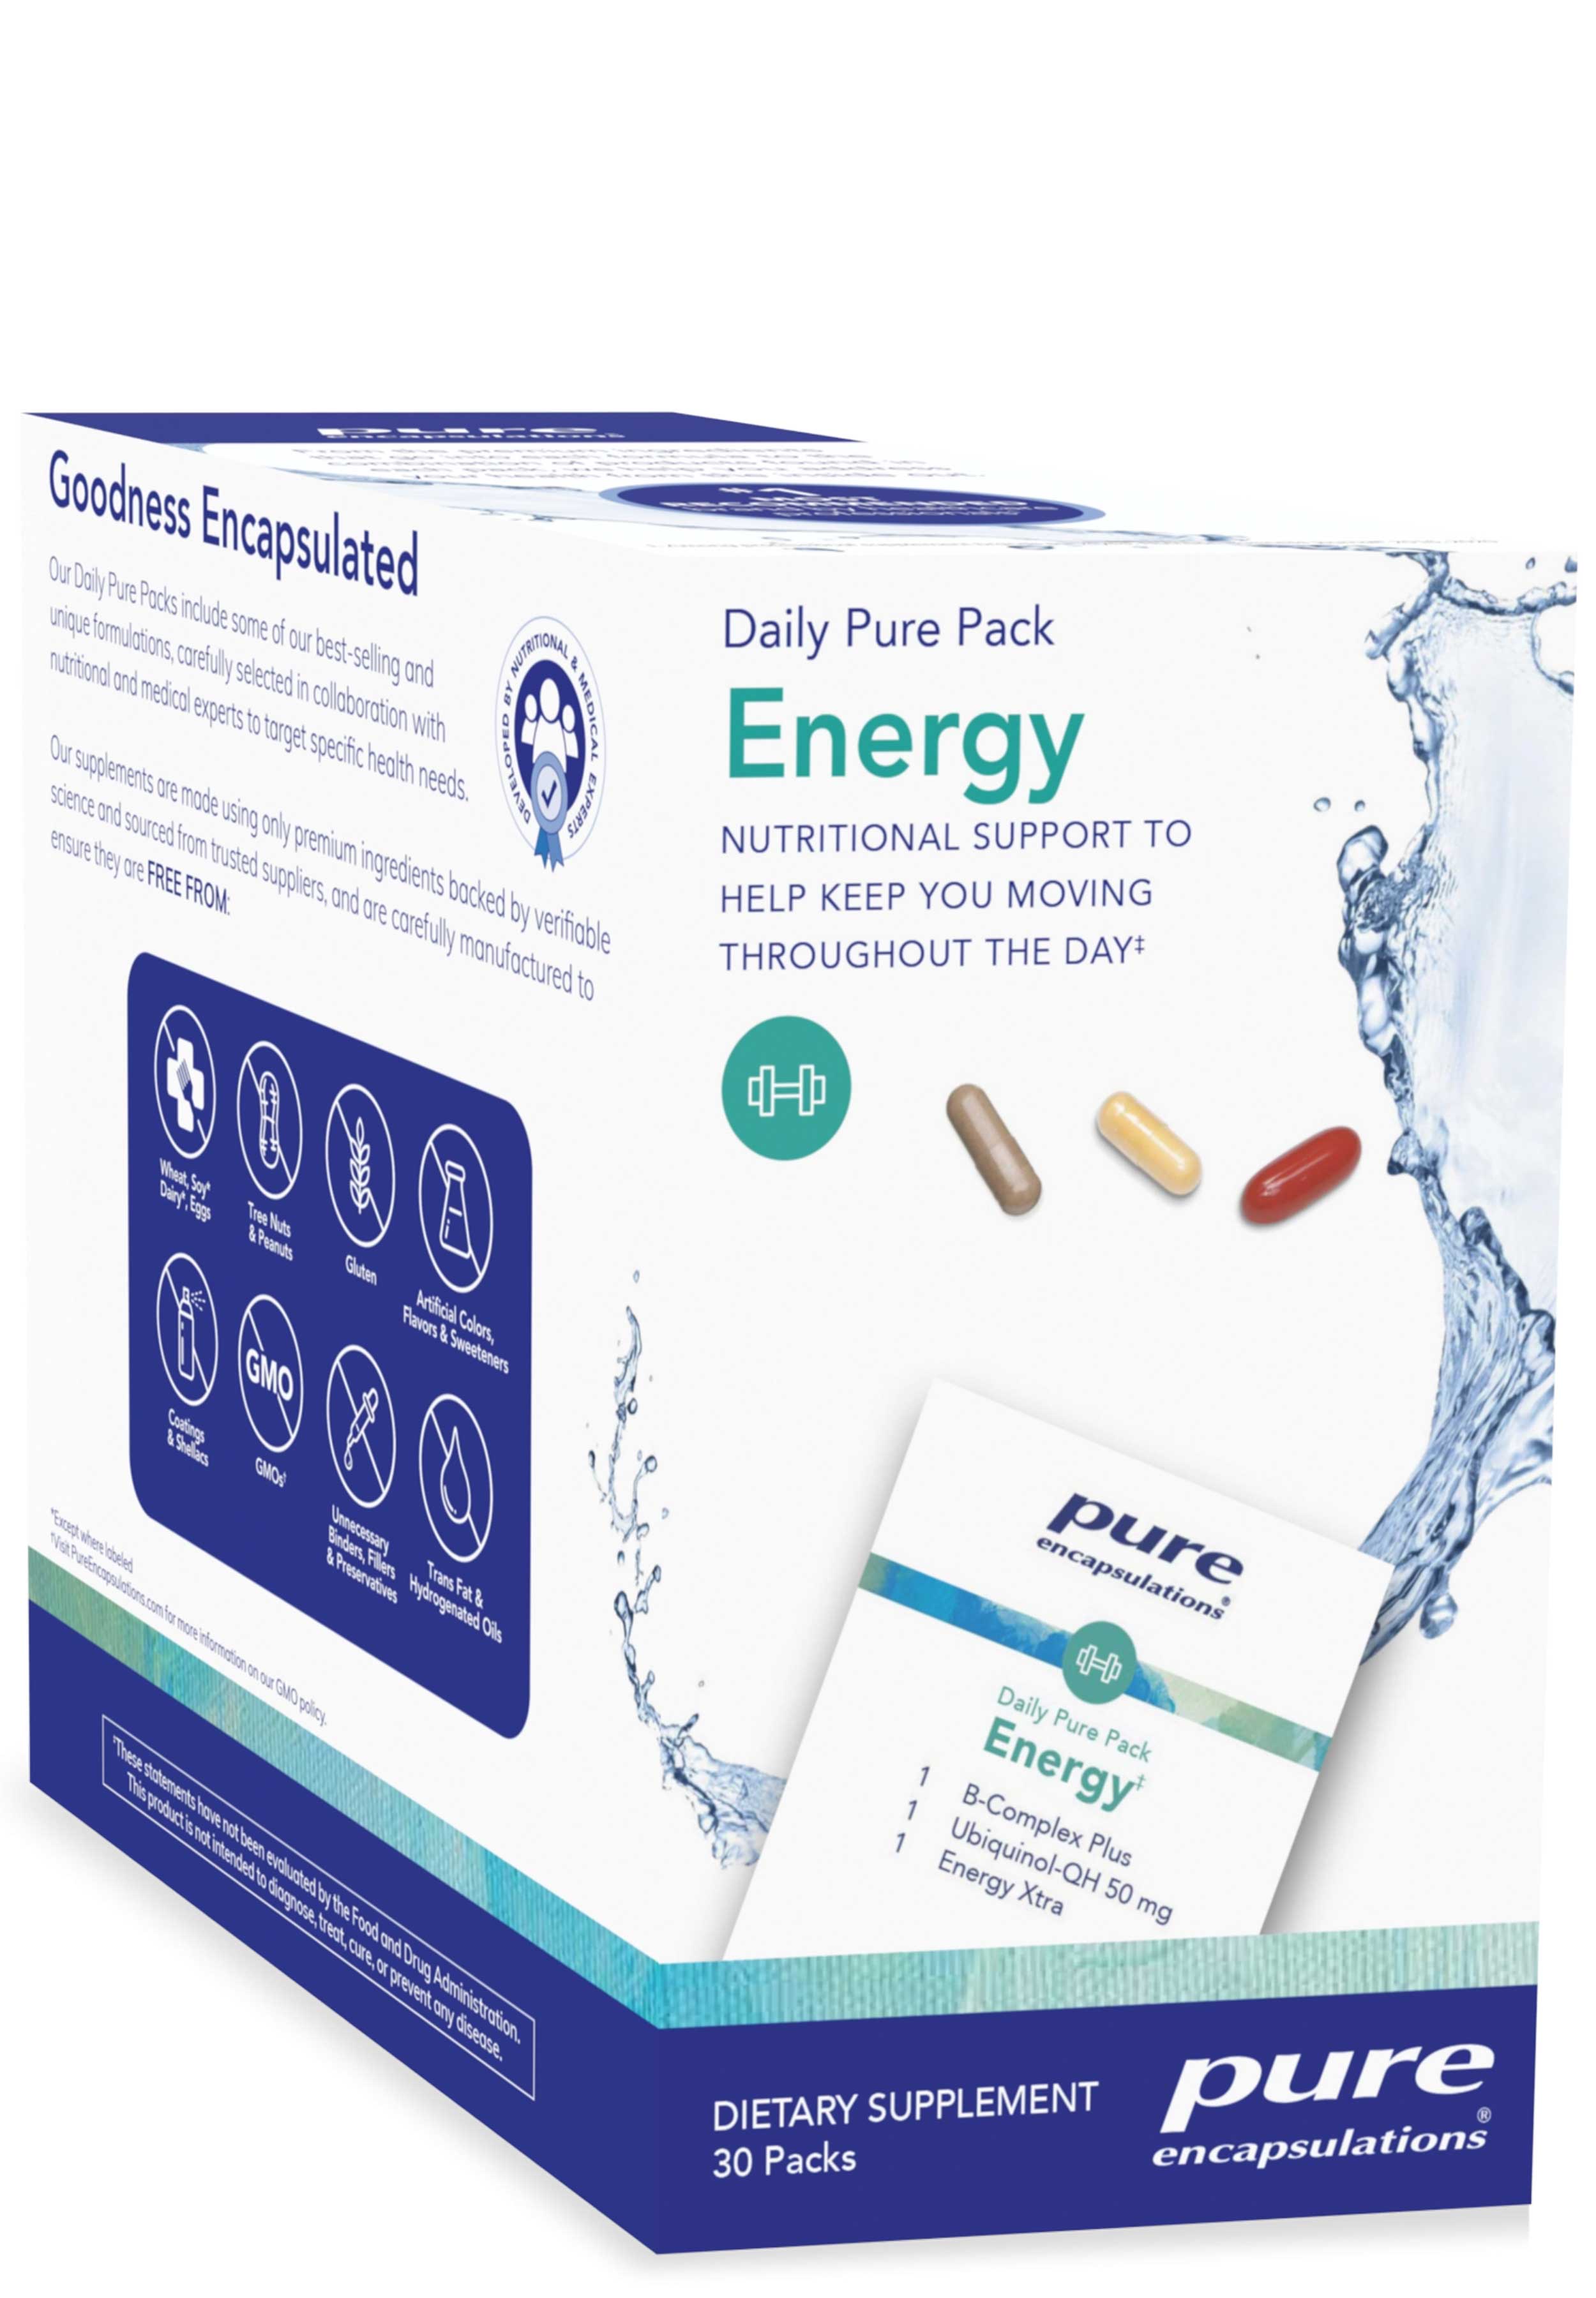 Pure Encapsulations Daily Pure Pack - Energy